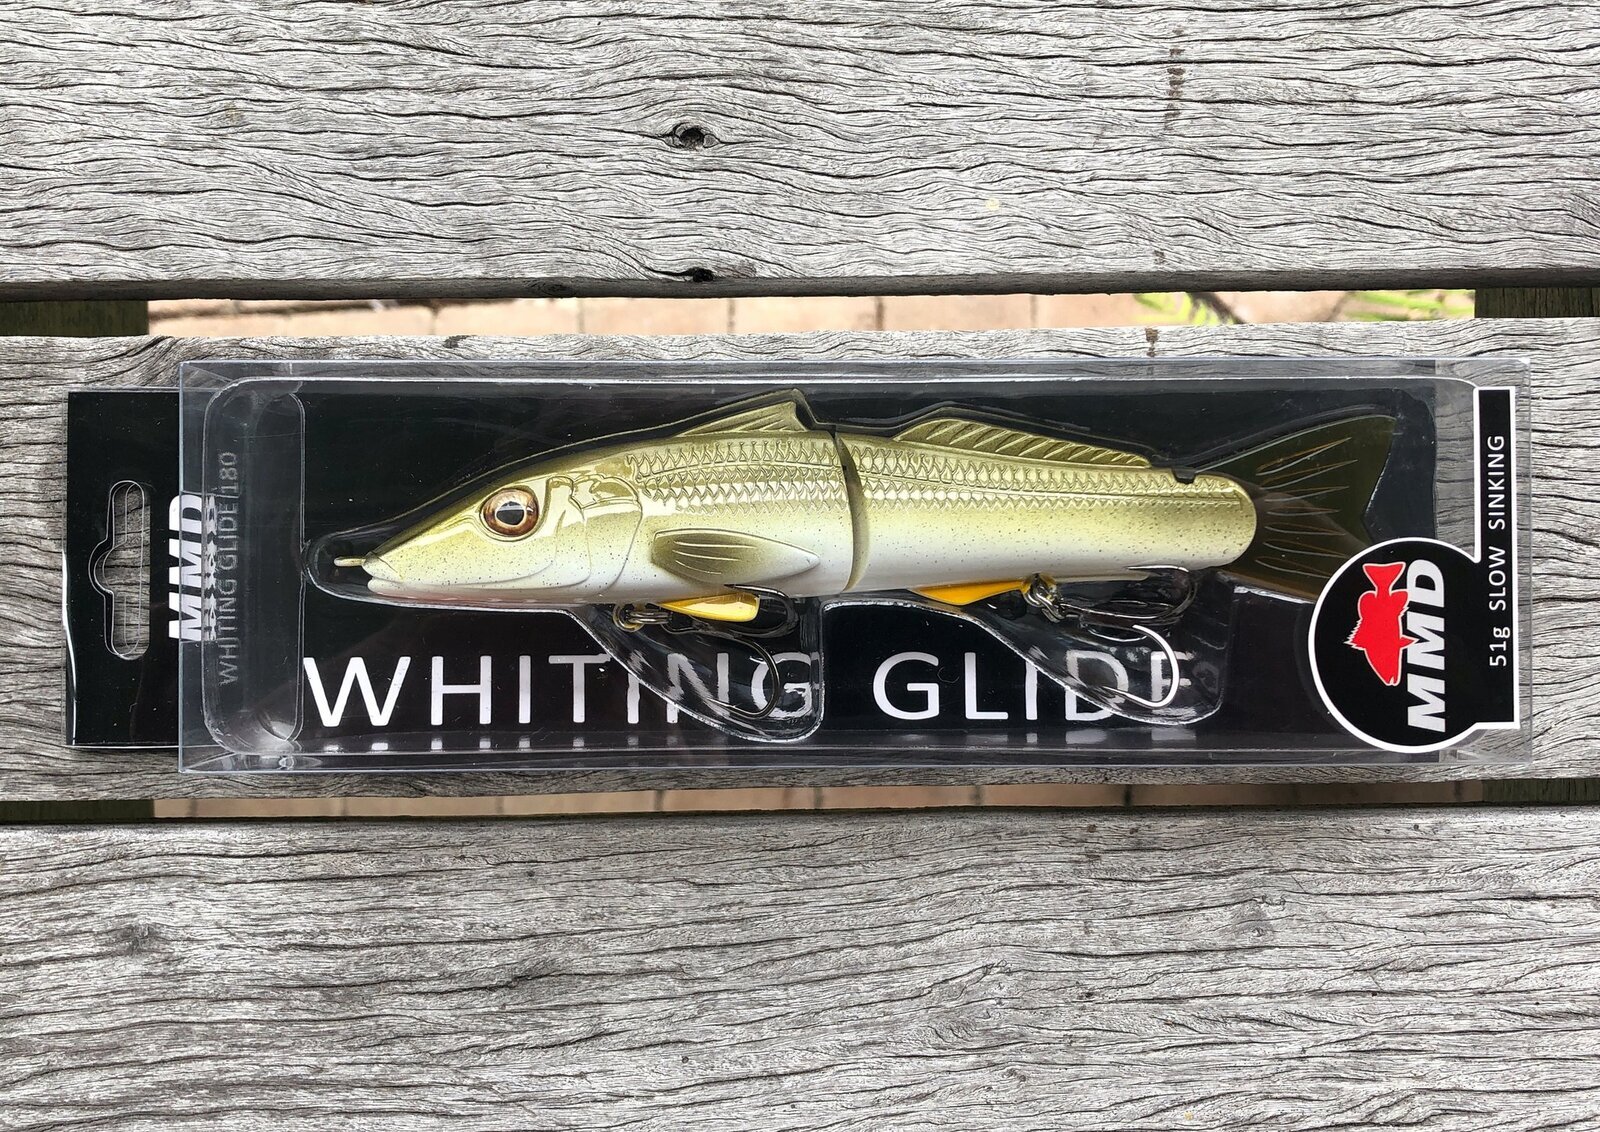 Brand New - MMD Whiting 180mm Glide Bait Fishing Lure - Choose